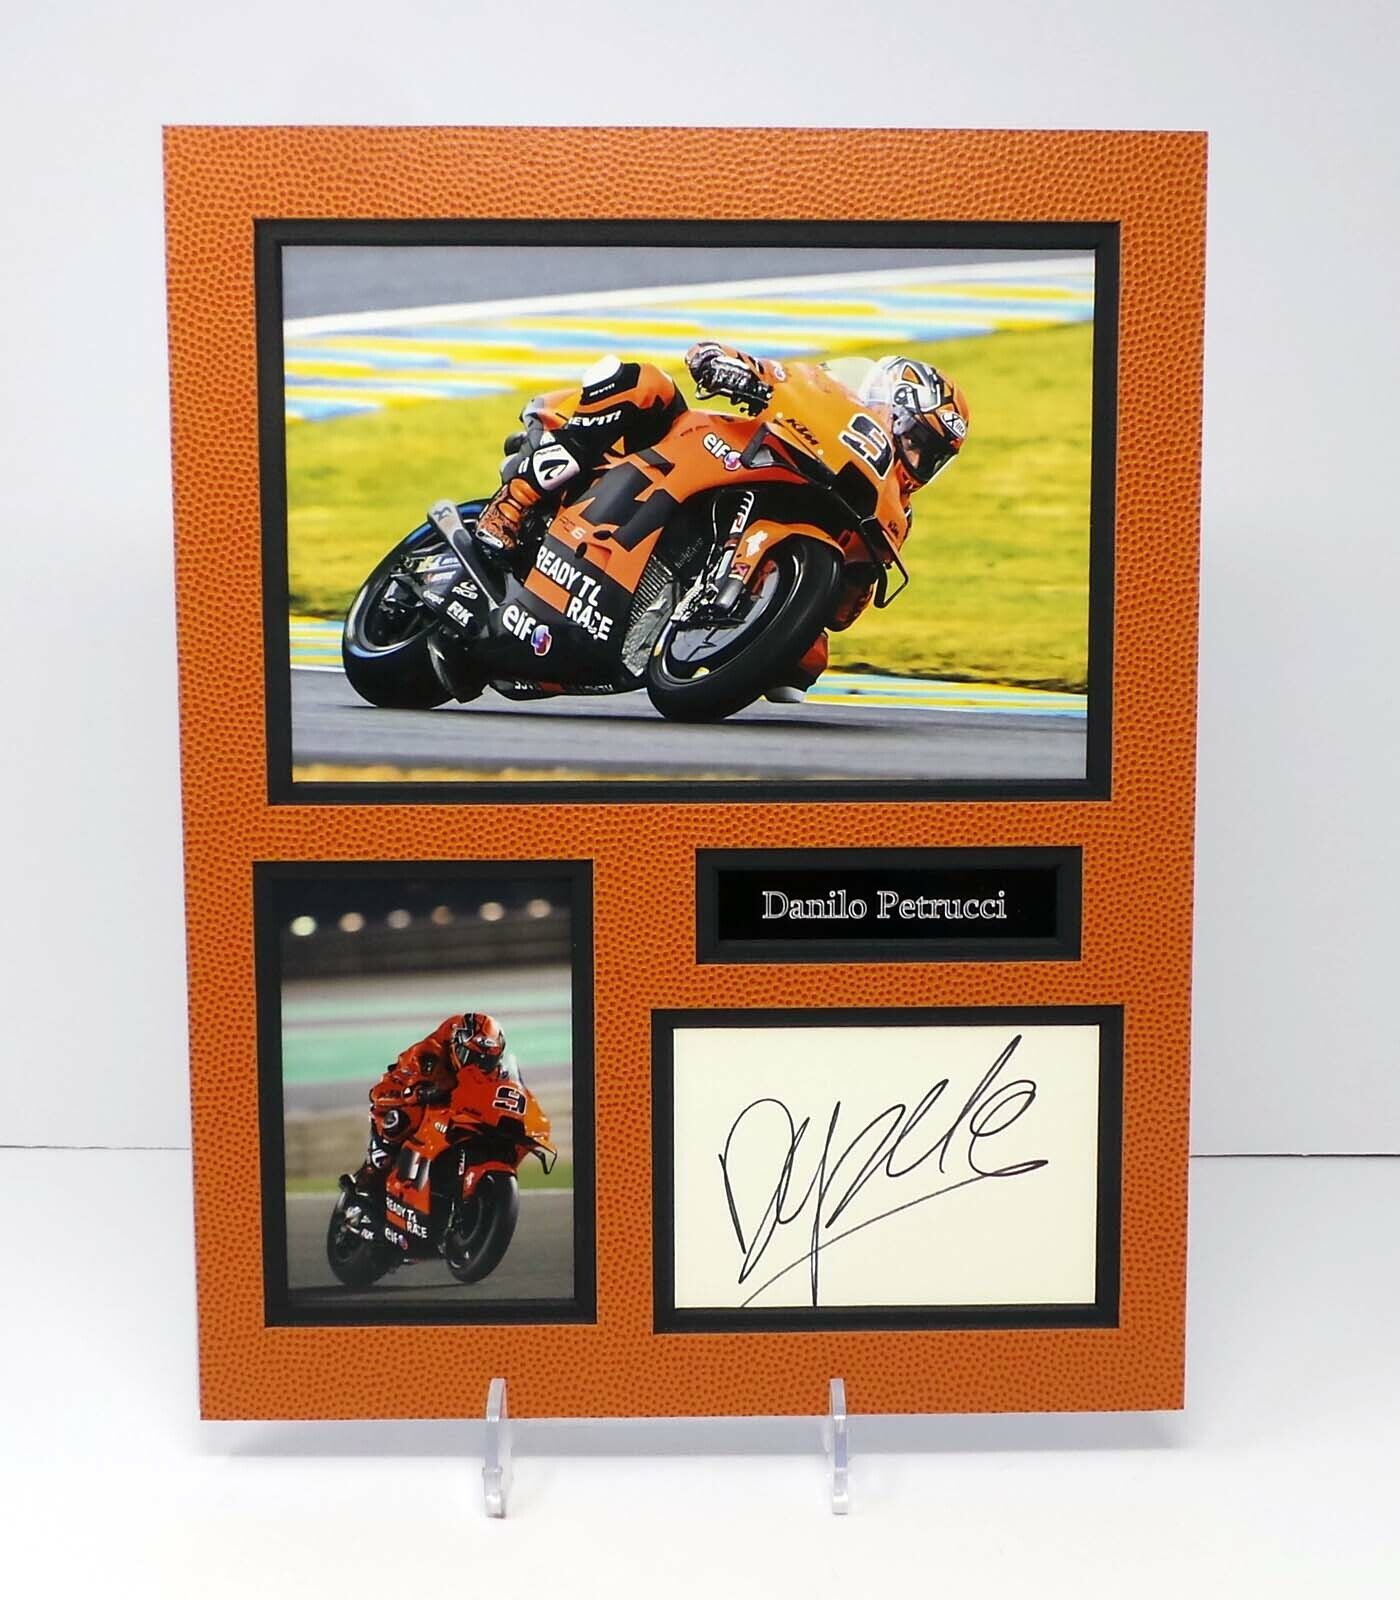 Danilo PETRUCCI Signed Mounted Photo Poster painting Display AFTAL RD COA Tech3 KTM MOTOGP Rider